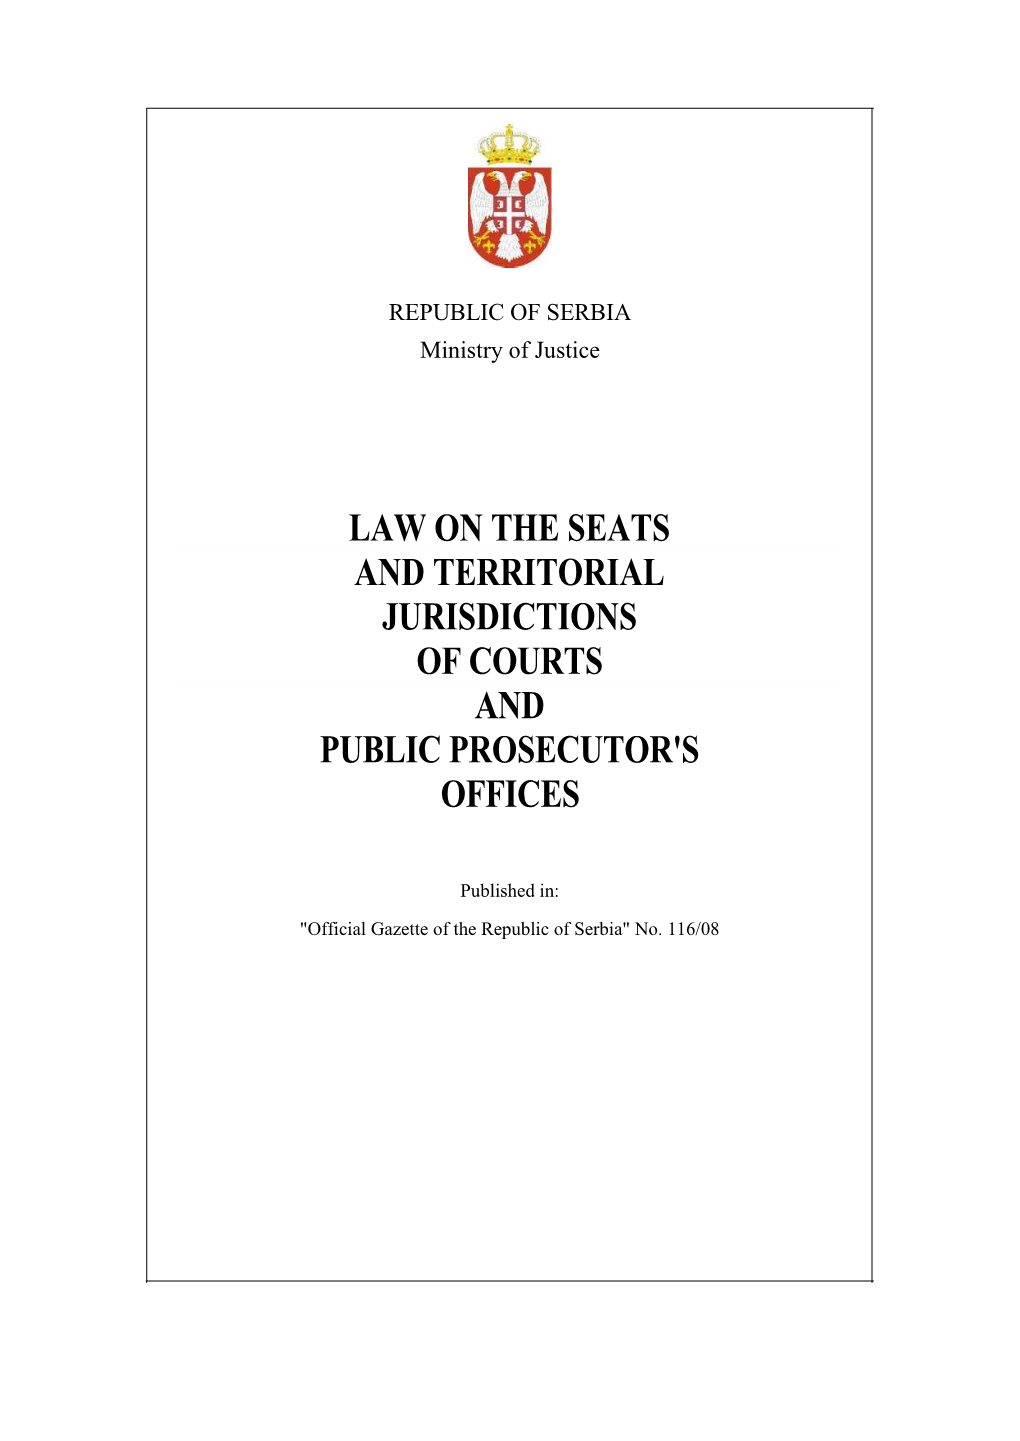 Law on the Seats and Territorial Jurisdictions of Courts and Public Prosecutor's Offices